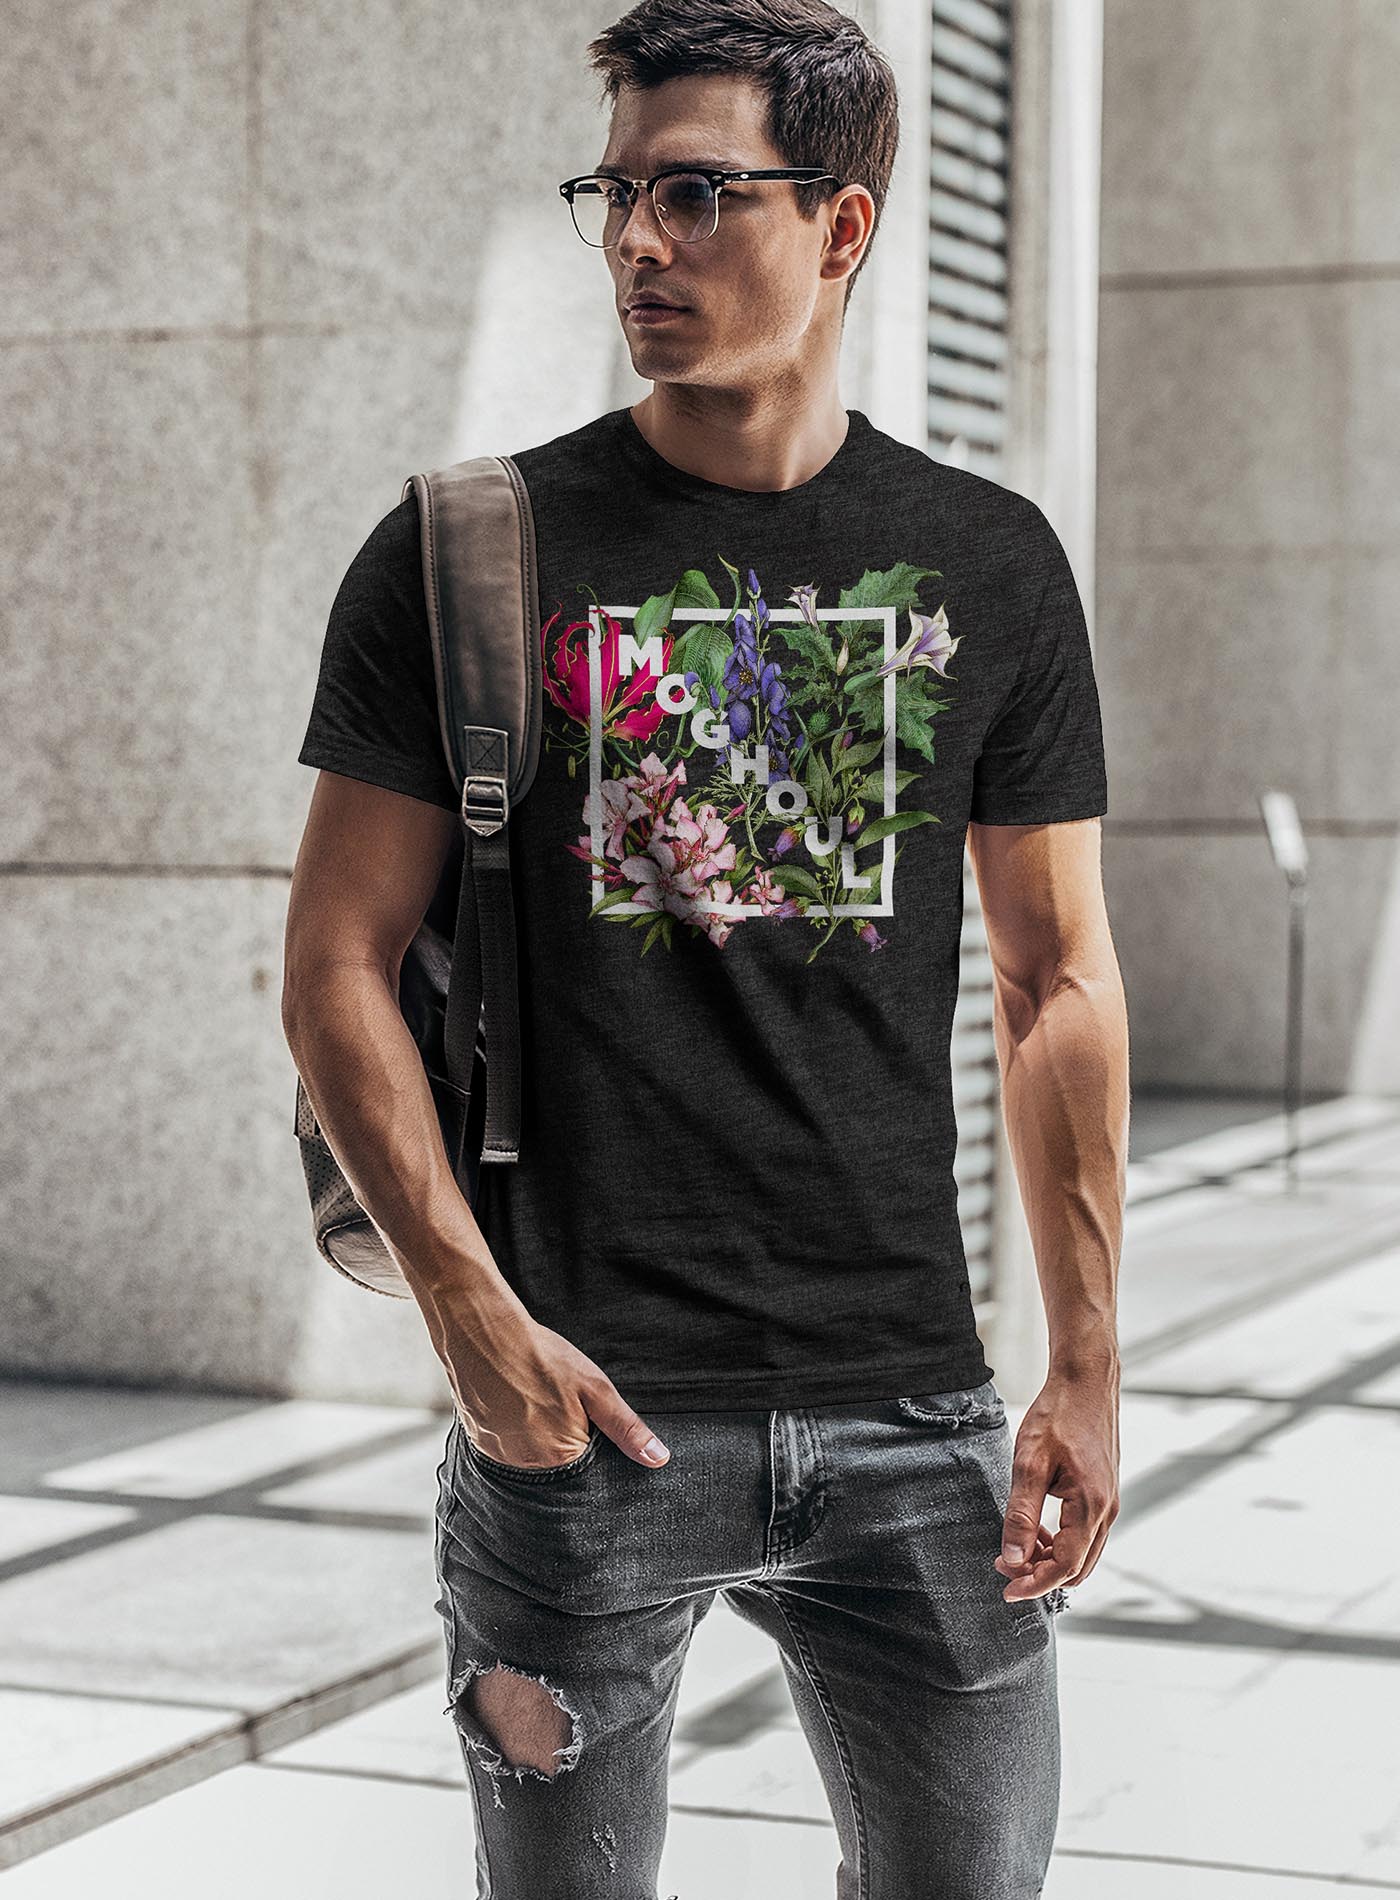 man modeling a Heather black unisex t-shirt featuring white Moghoul logo surrounded by poisonous flowers such as oleander, fire lily, belladonna and toloache.